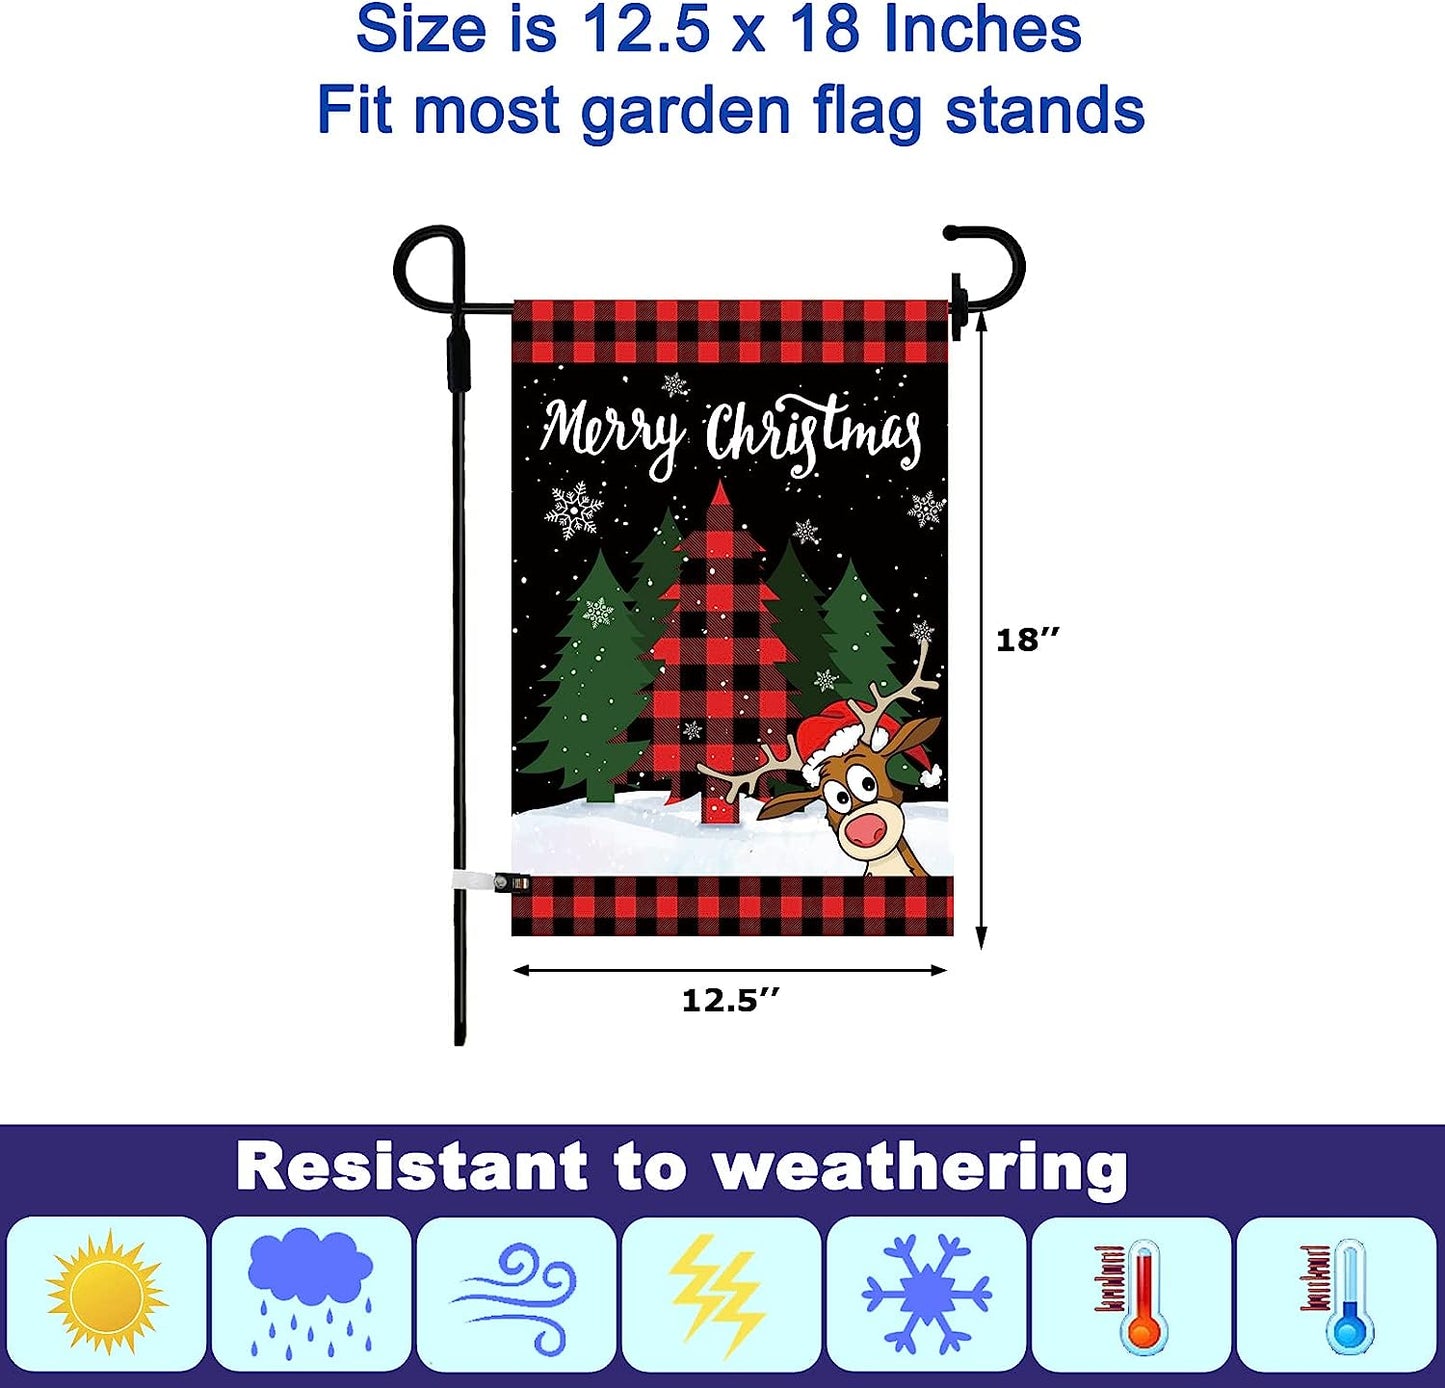 Seasonal Garden Flags Set of 12 Double Sided 12 x 18 Inch Yard Flags, Small Garden Flags for Outside, Fall Winter Halloween Christmas Outdoor Flags, Holiday Garden Flags for All Seasons